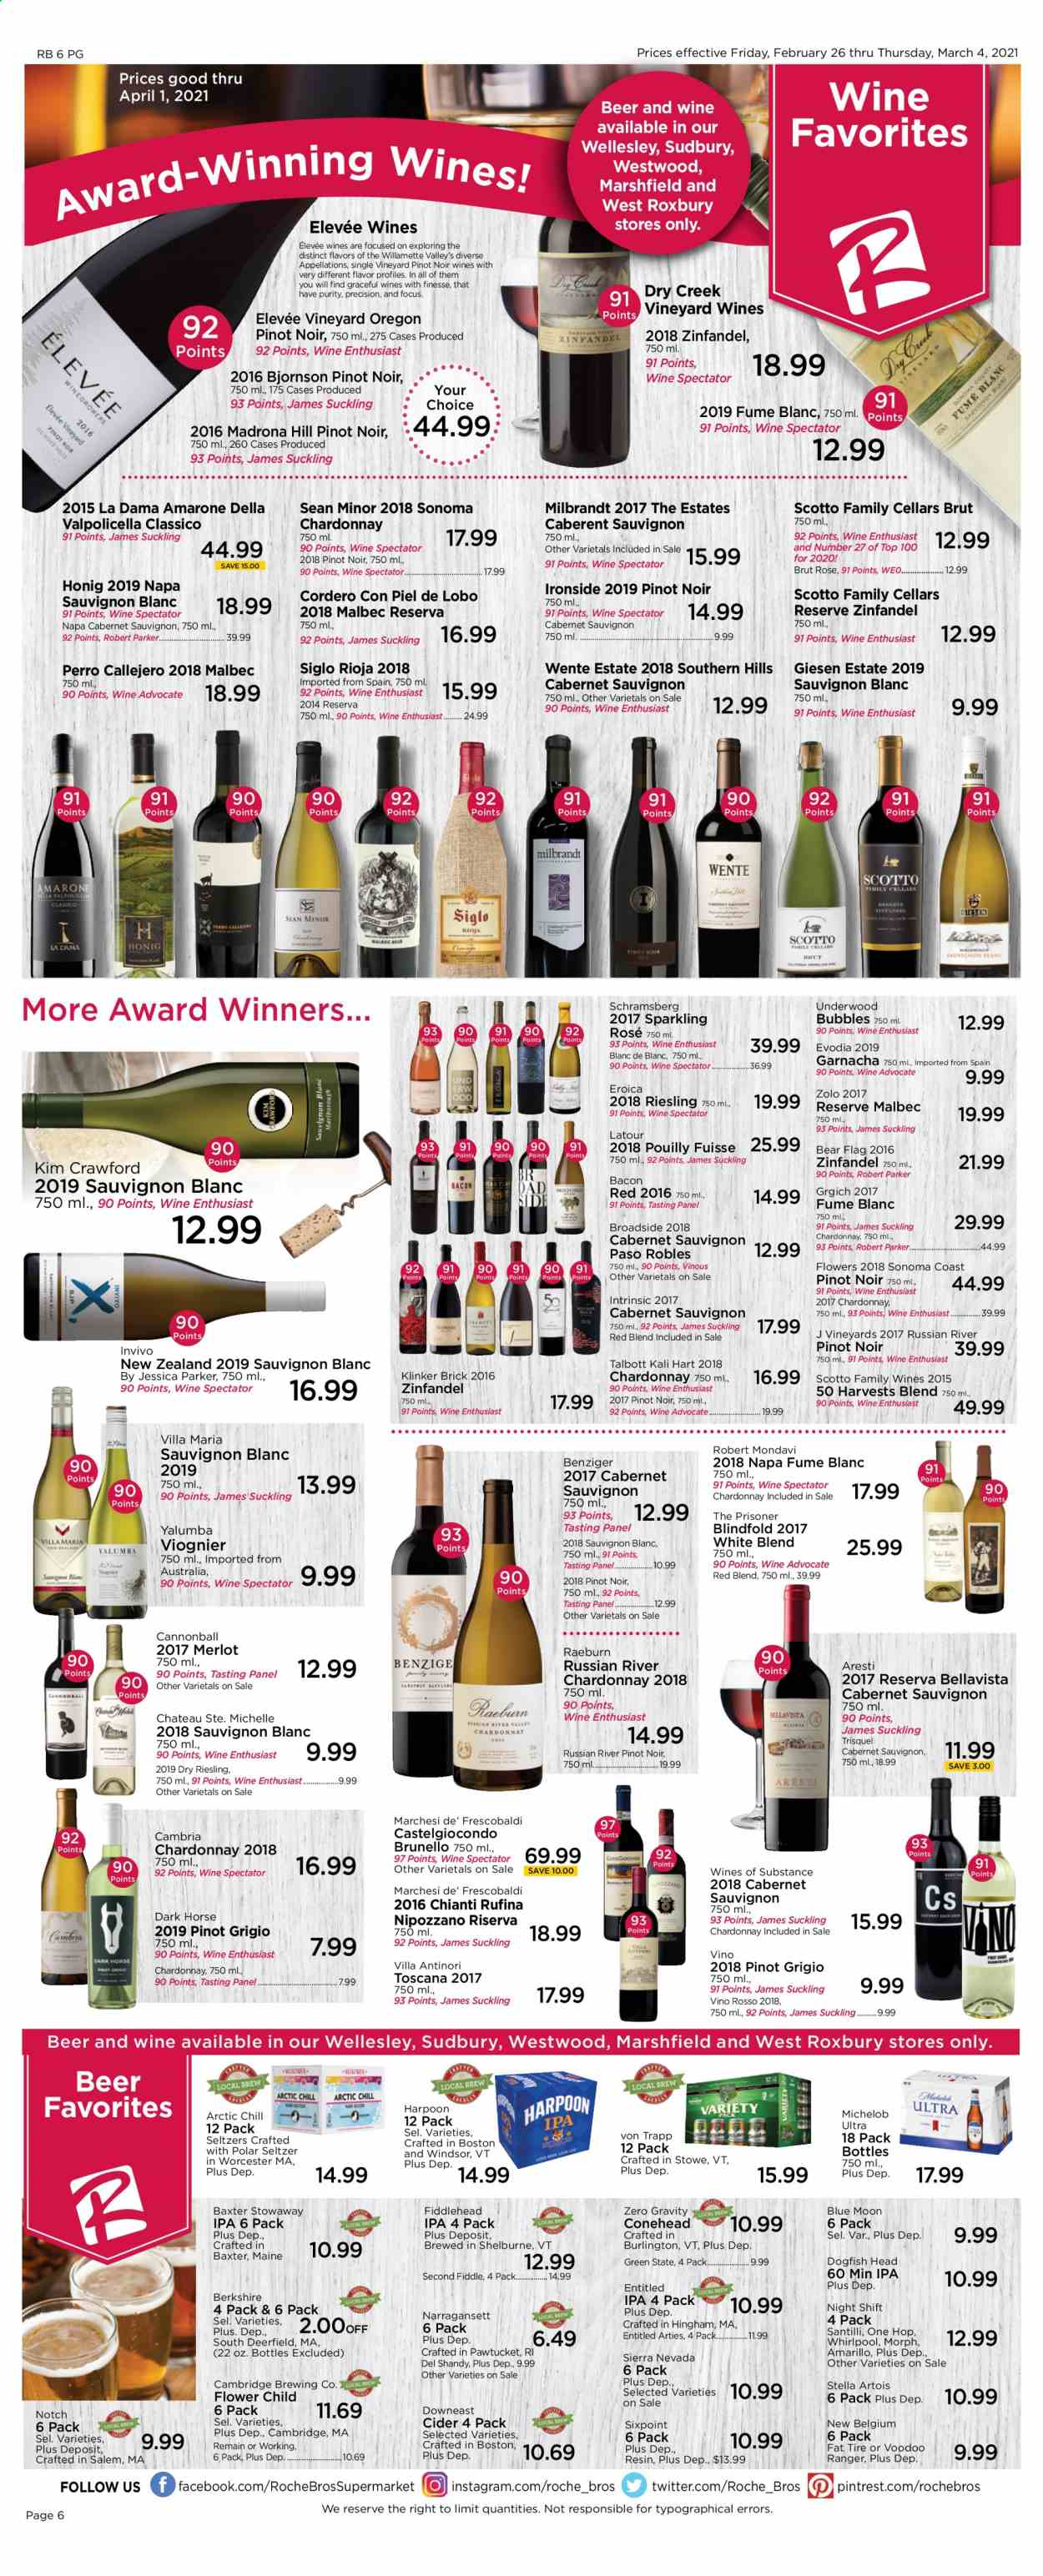 thumbnail - Roche Bros. Flyer - 02/26/2021 - 03/04/2021 - Sales products - Stella Artois, Blue Moon, Michelob, bacon, seltzer water, Cabernet Sauvignon, Riesling, Chardonnay, wine, Merlot, Pinot Noir, Pinot Grigio, Sauvignon Blanc, apple cider, beer, IPA, Brut, Hill's, rose. Page 6.